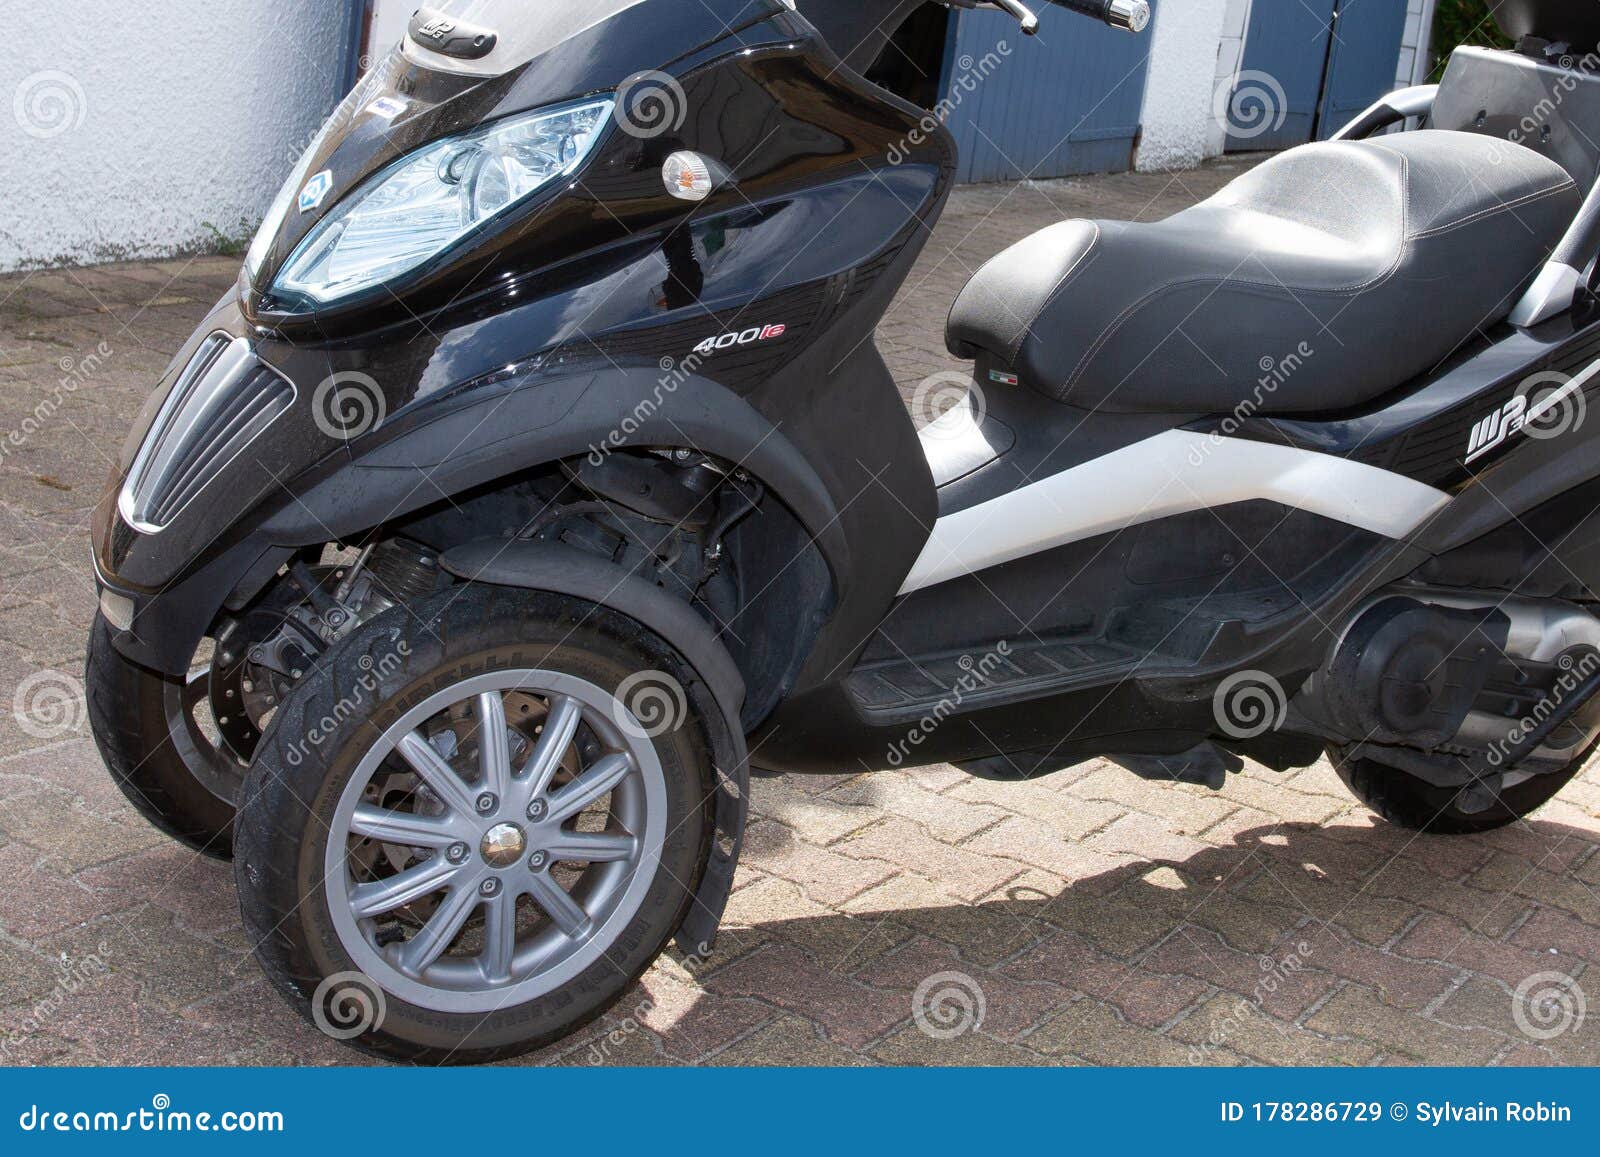 Geestelijk overdracht Graden Celsius Bordeaux , Aquitaine / France - 03 30 2020 : Piaggio Three Wheels Motorcycle  MP3 Detail Scooter Editorial Stock Image - Image of model, front: 178286729